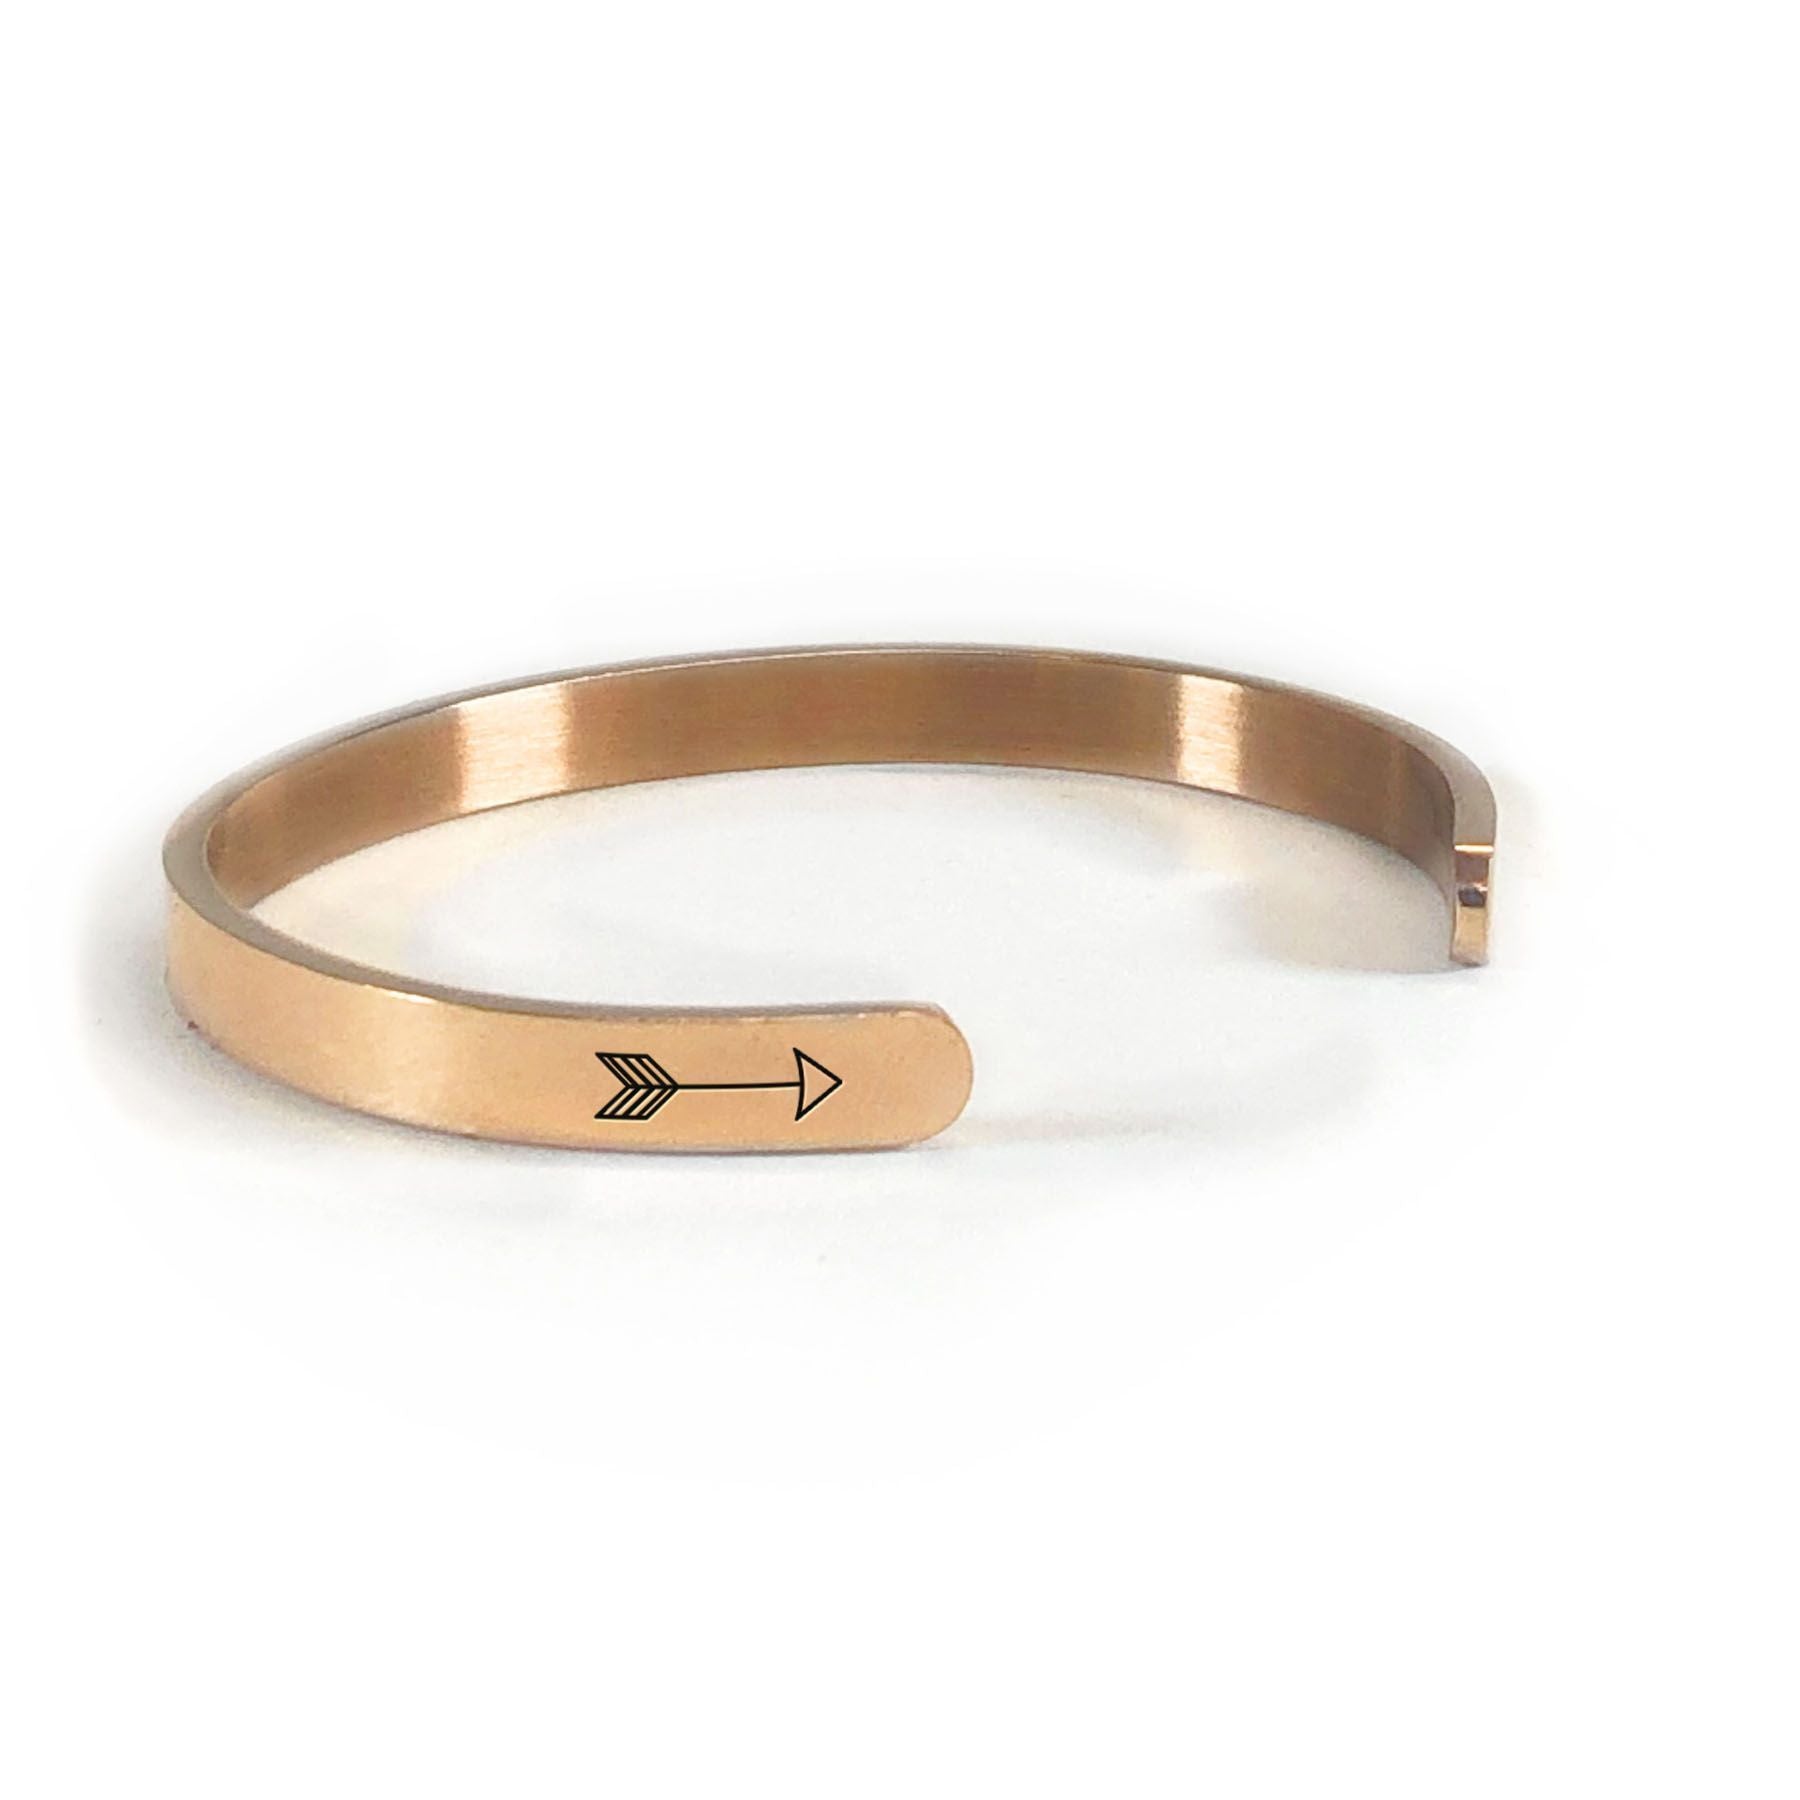 Live what you love bracelet in rose gold rotated to show arrows and cuff opening